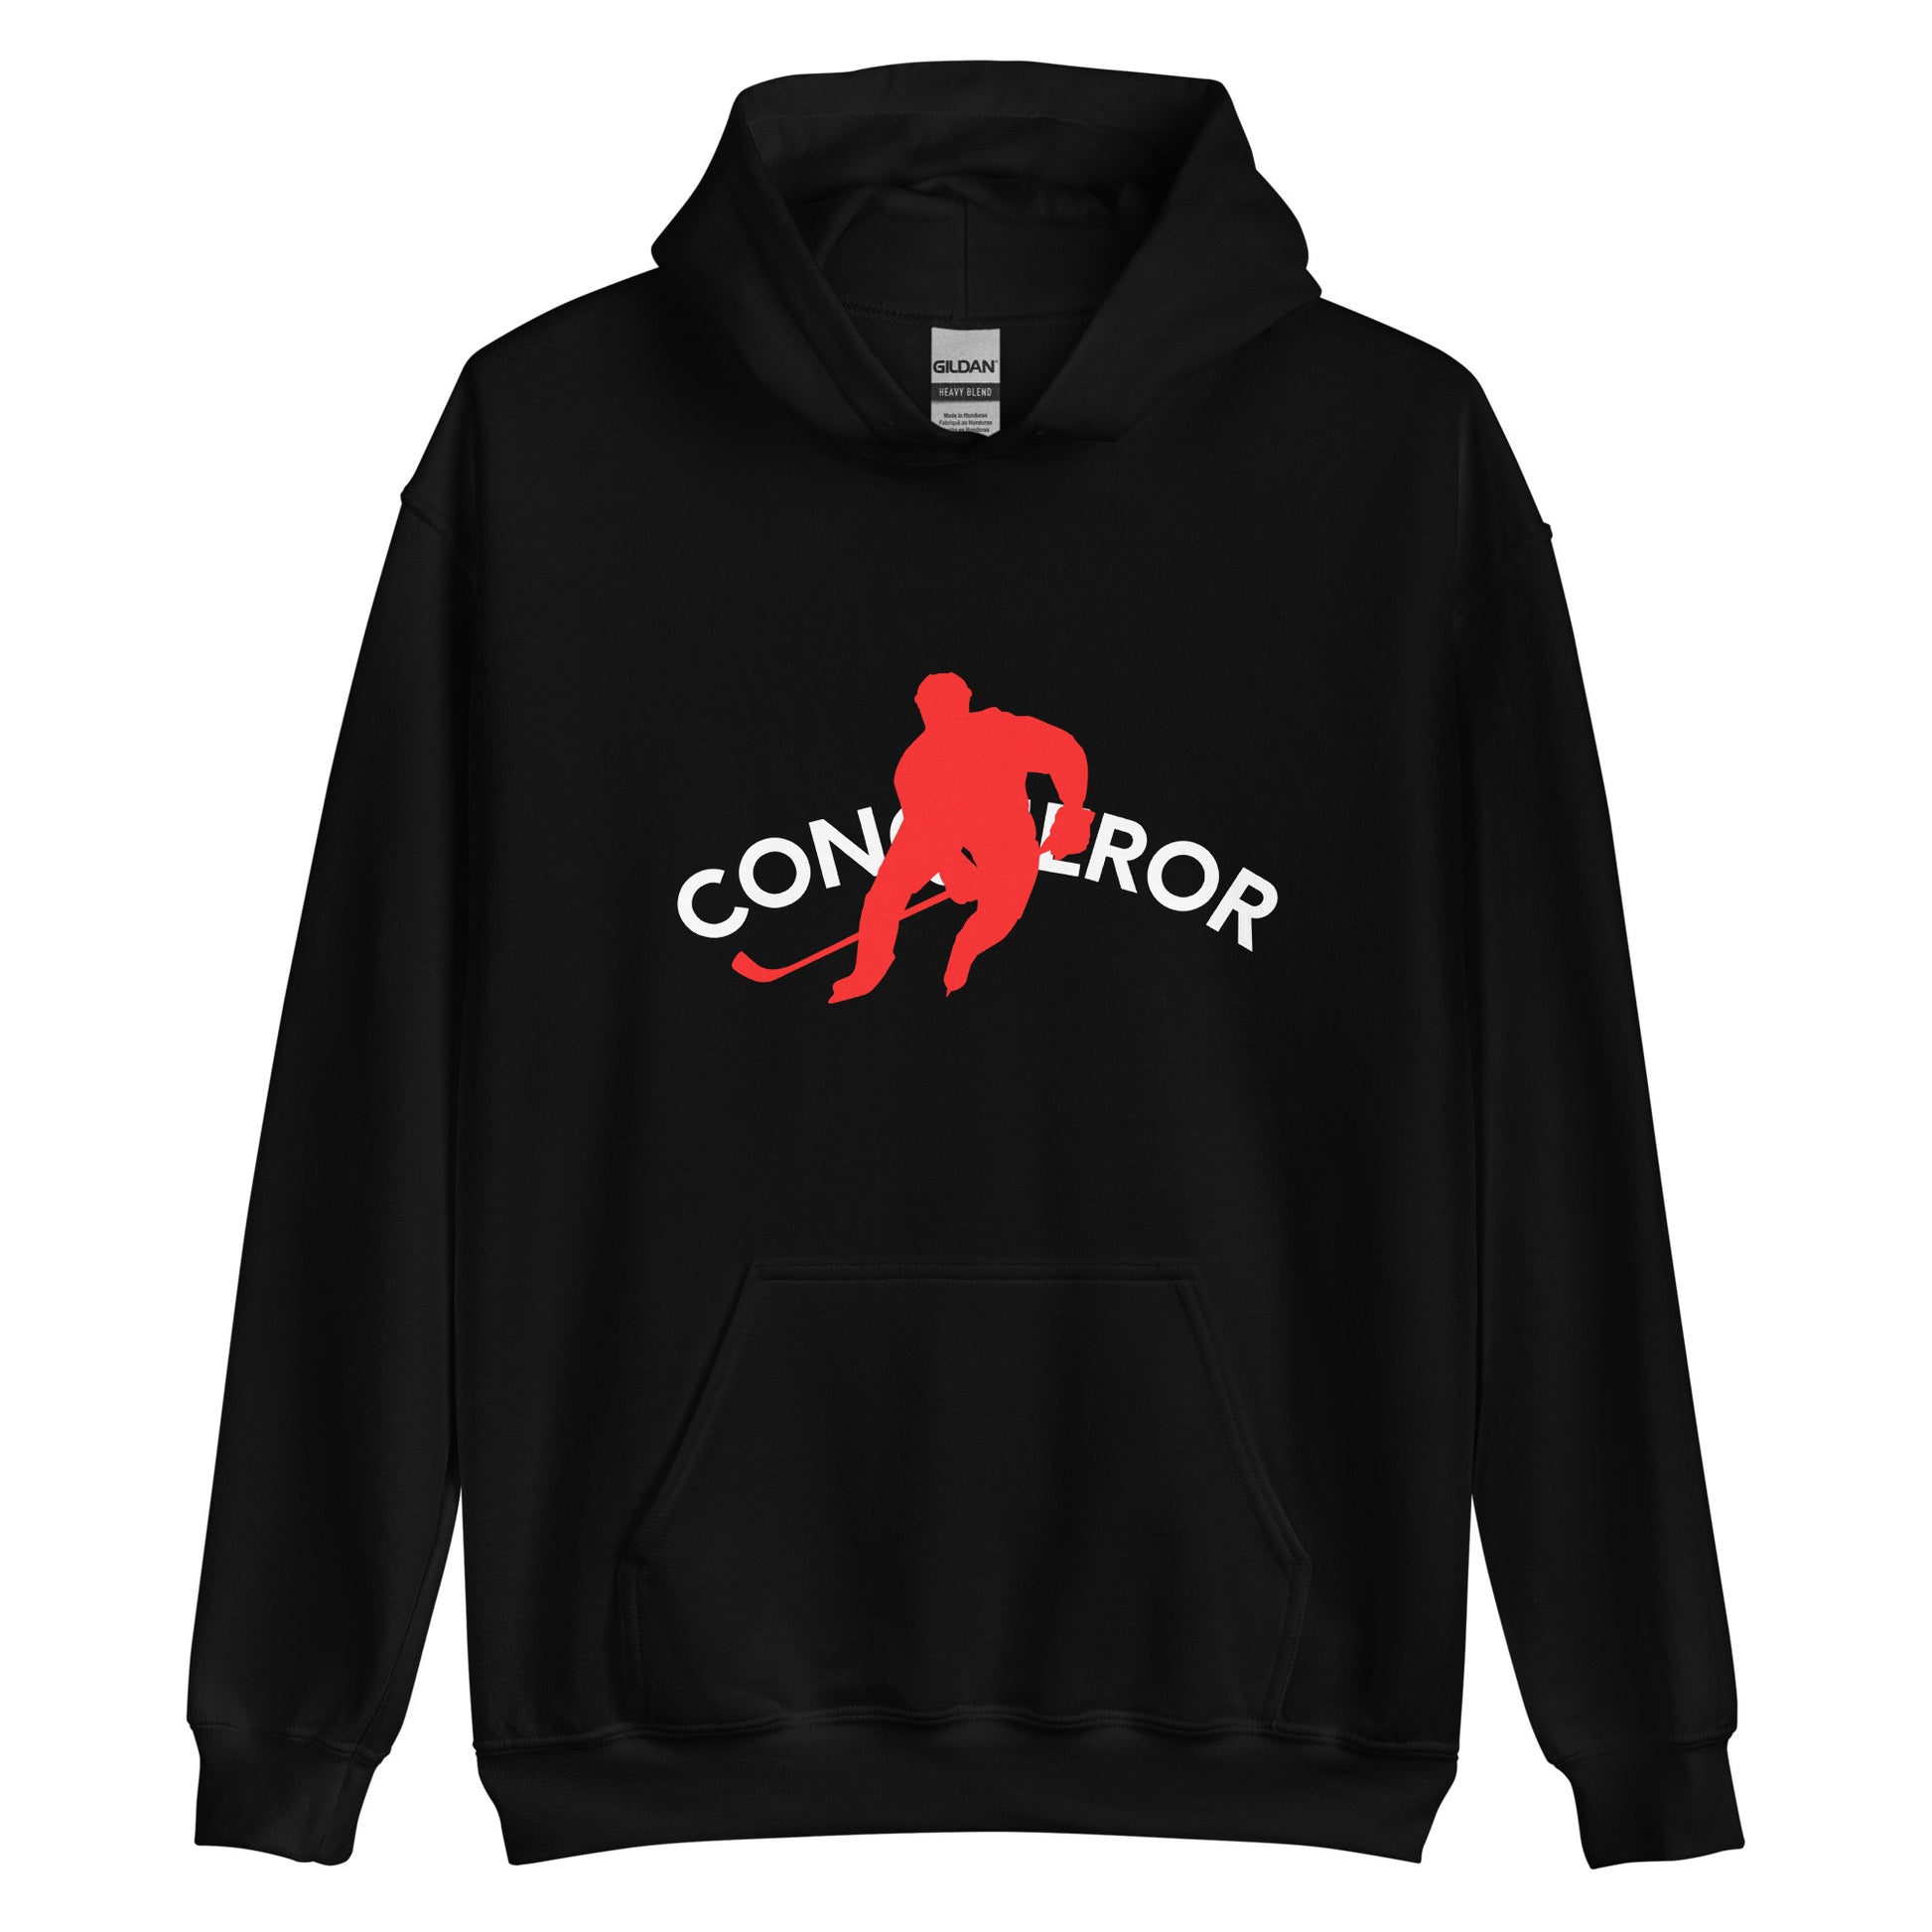 Unisex Hoodie for conqueror hockey player – Verily wear